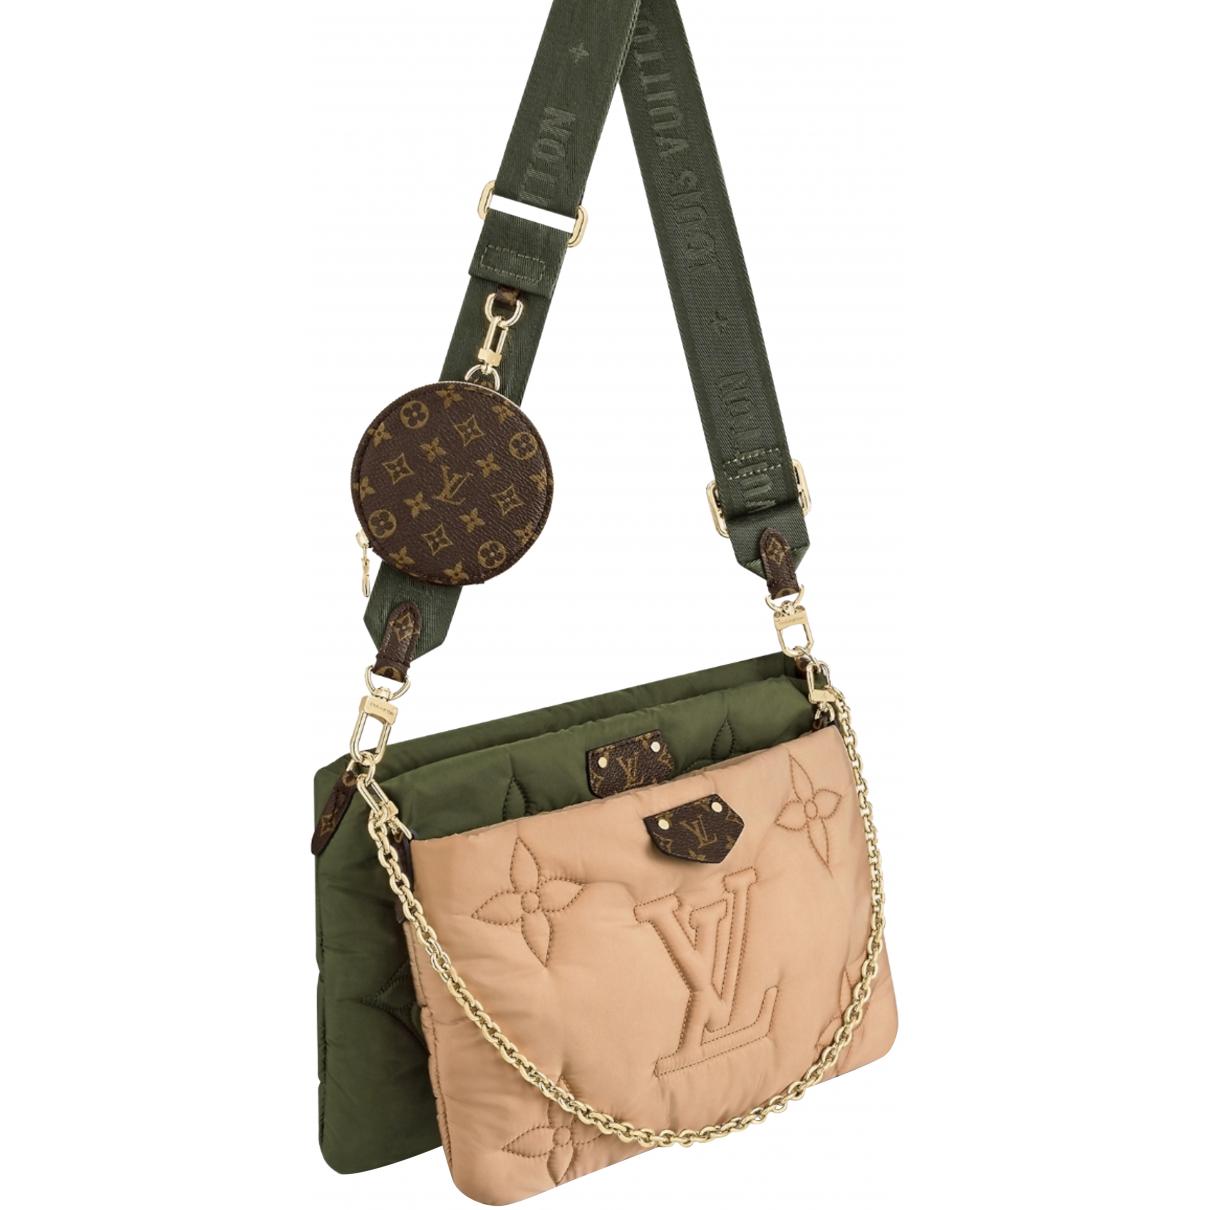 $199.99 · The Multi Pochette Accessoires is a hybrid cross-body bag with  multiple pockets and compartments that brings together …